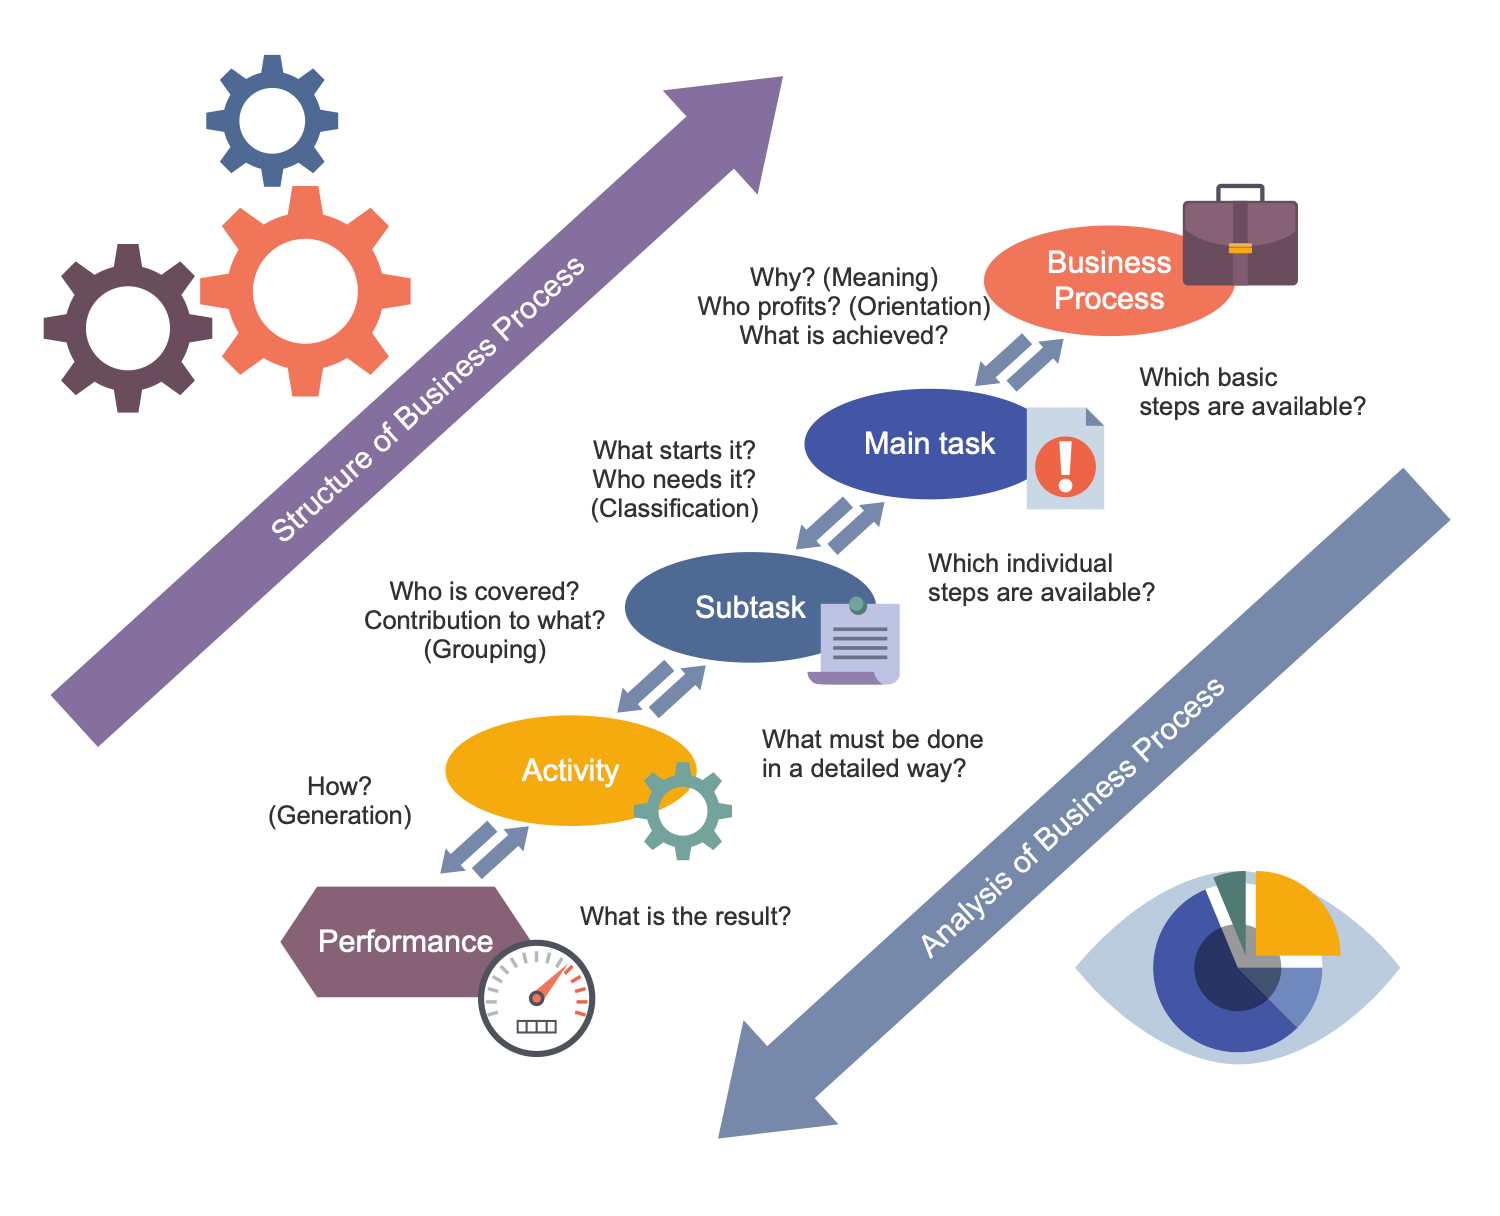 Business Process Workflow Diagram - Business Processes Structure and Analysis